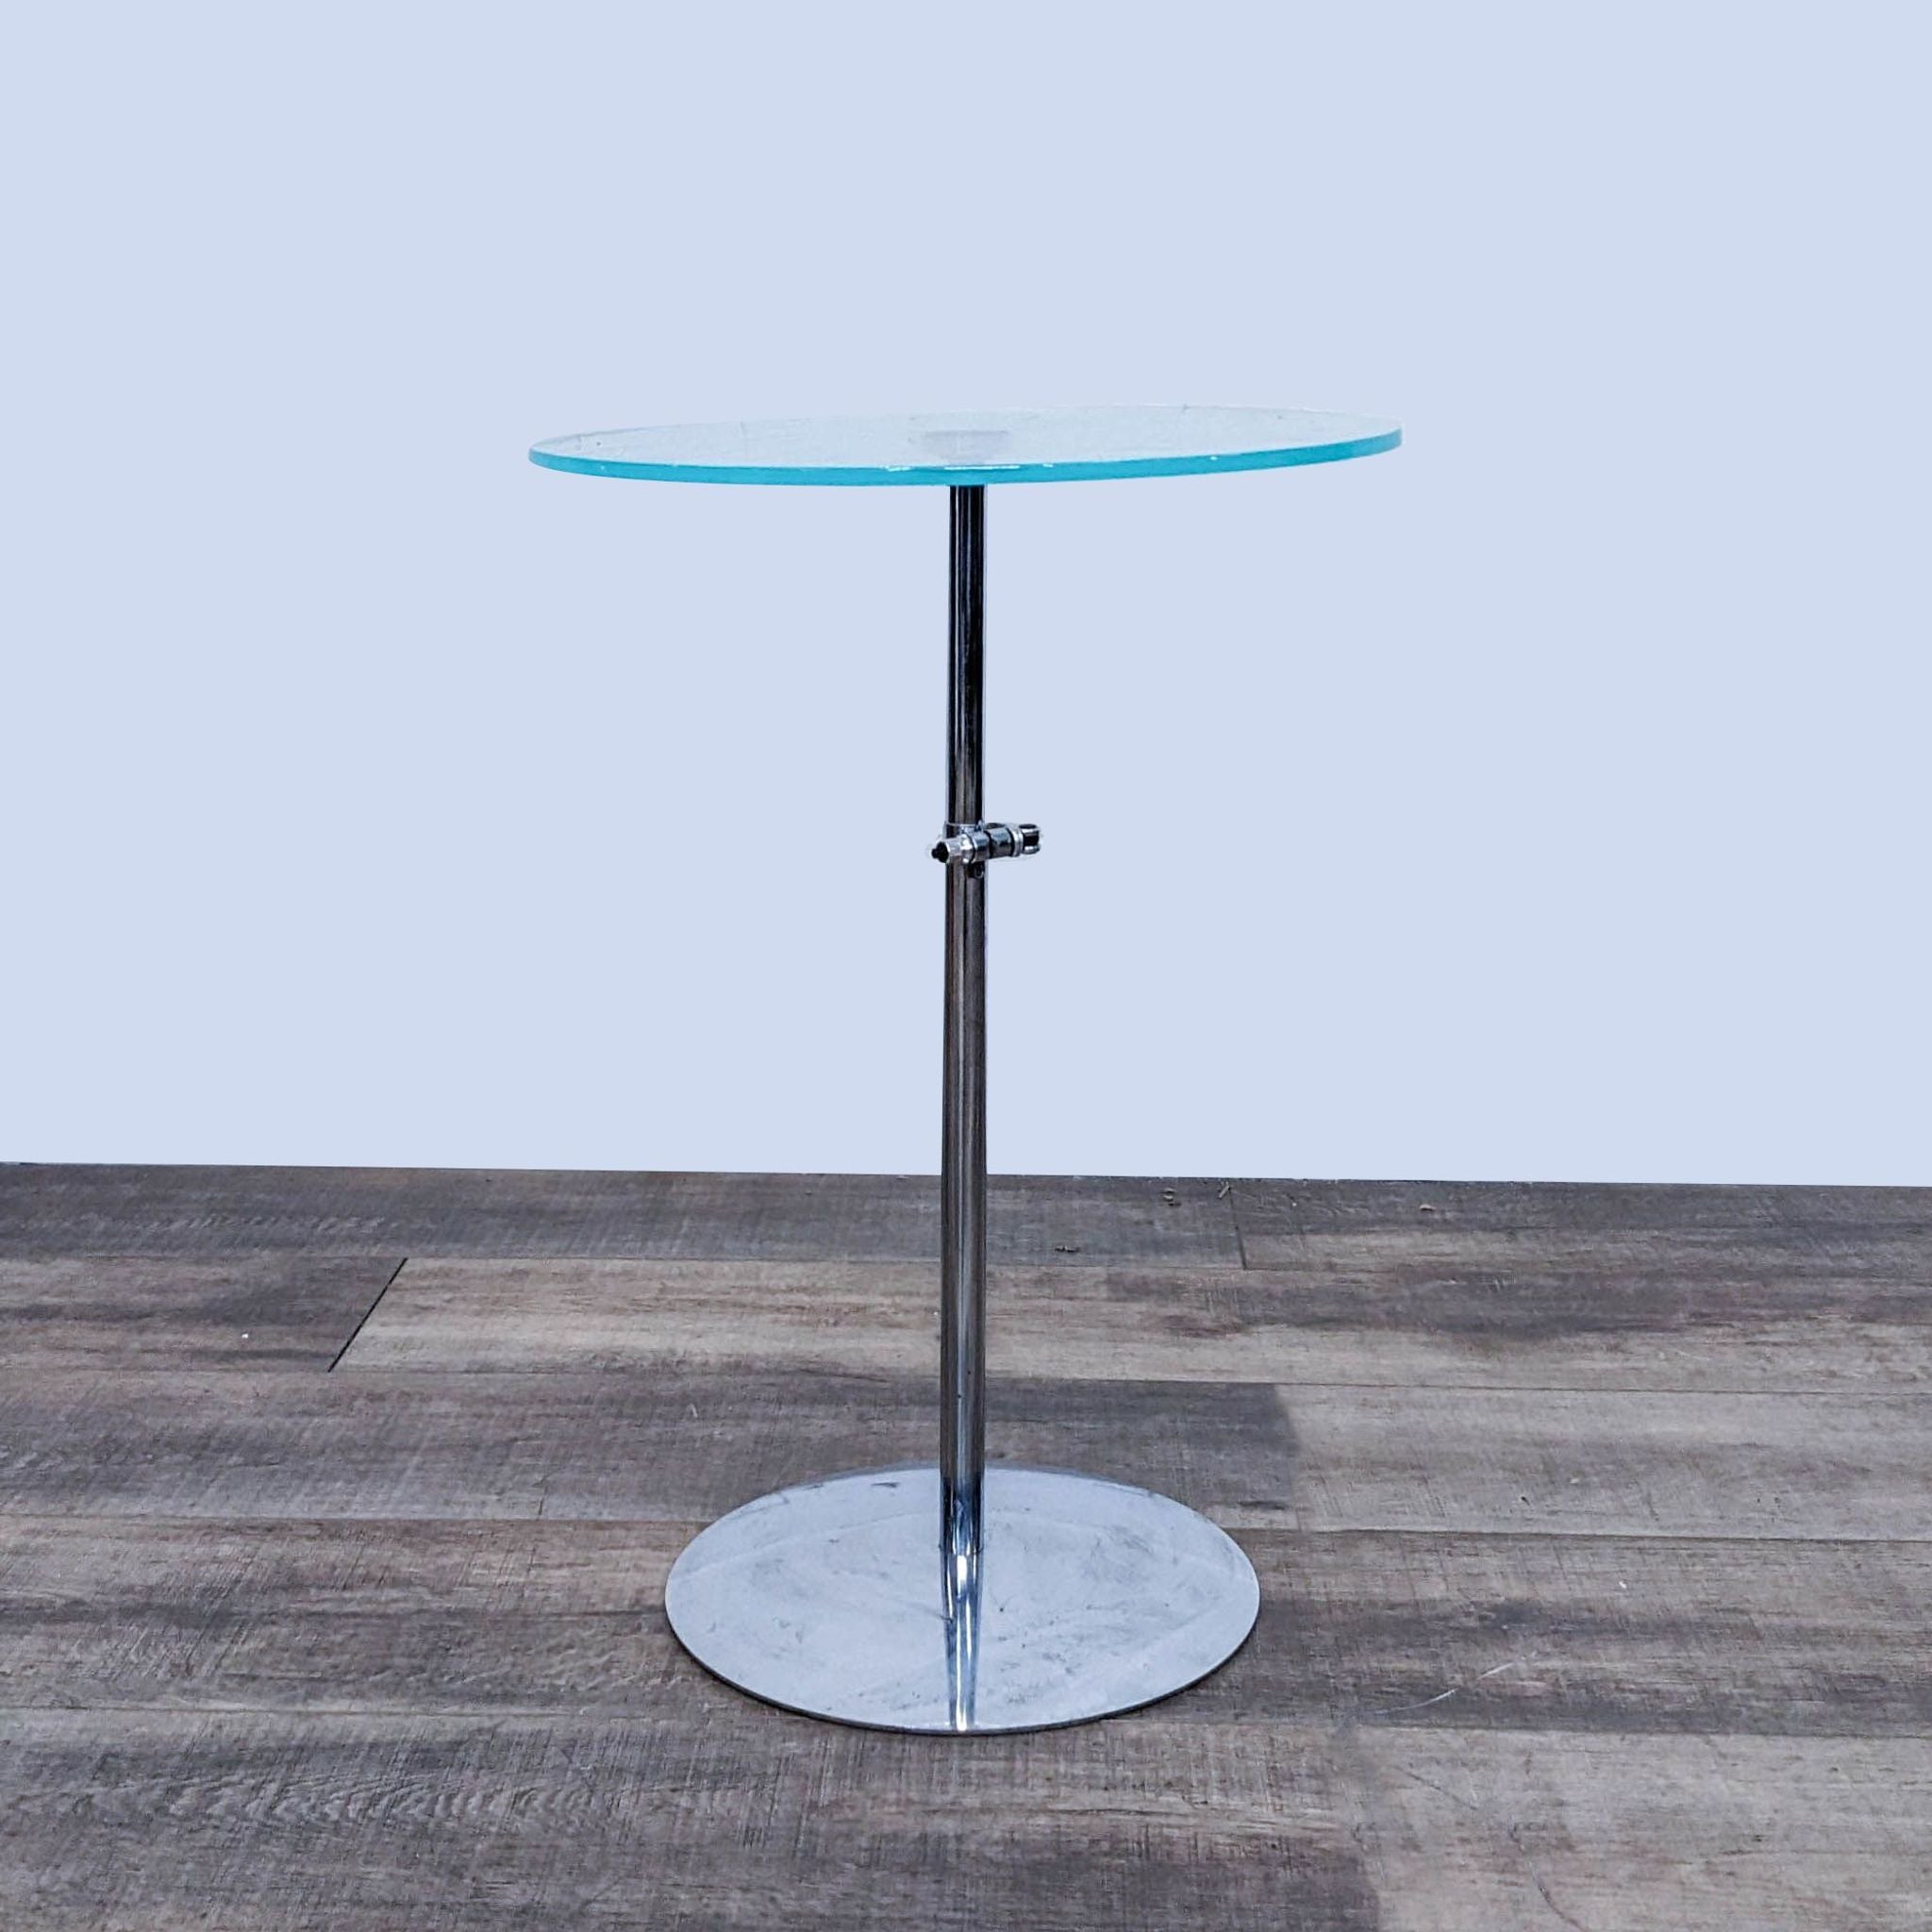 Crate & Barrel side table with a round glass top on a chrome pedestal base, against a wooden floor background.